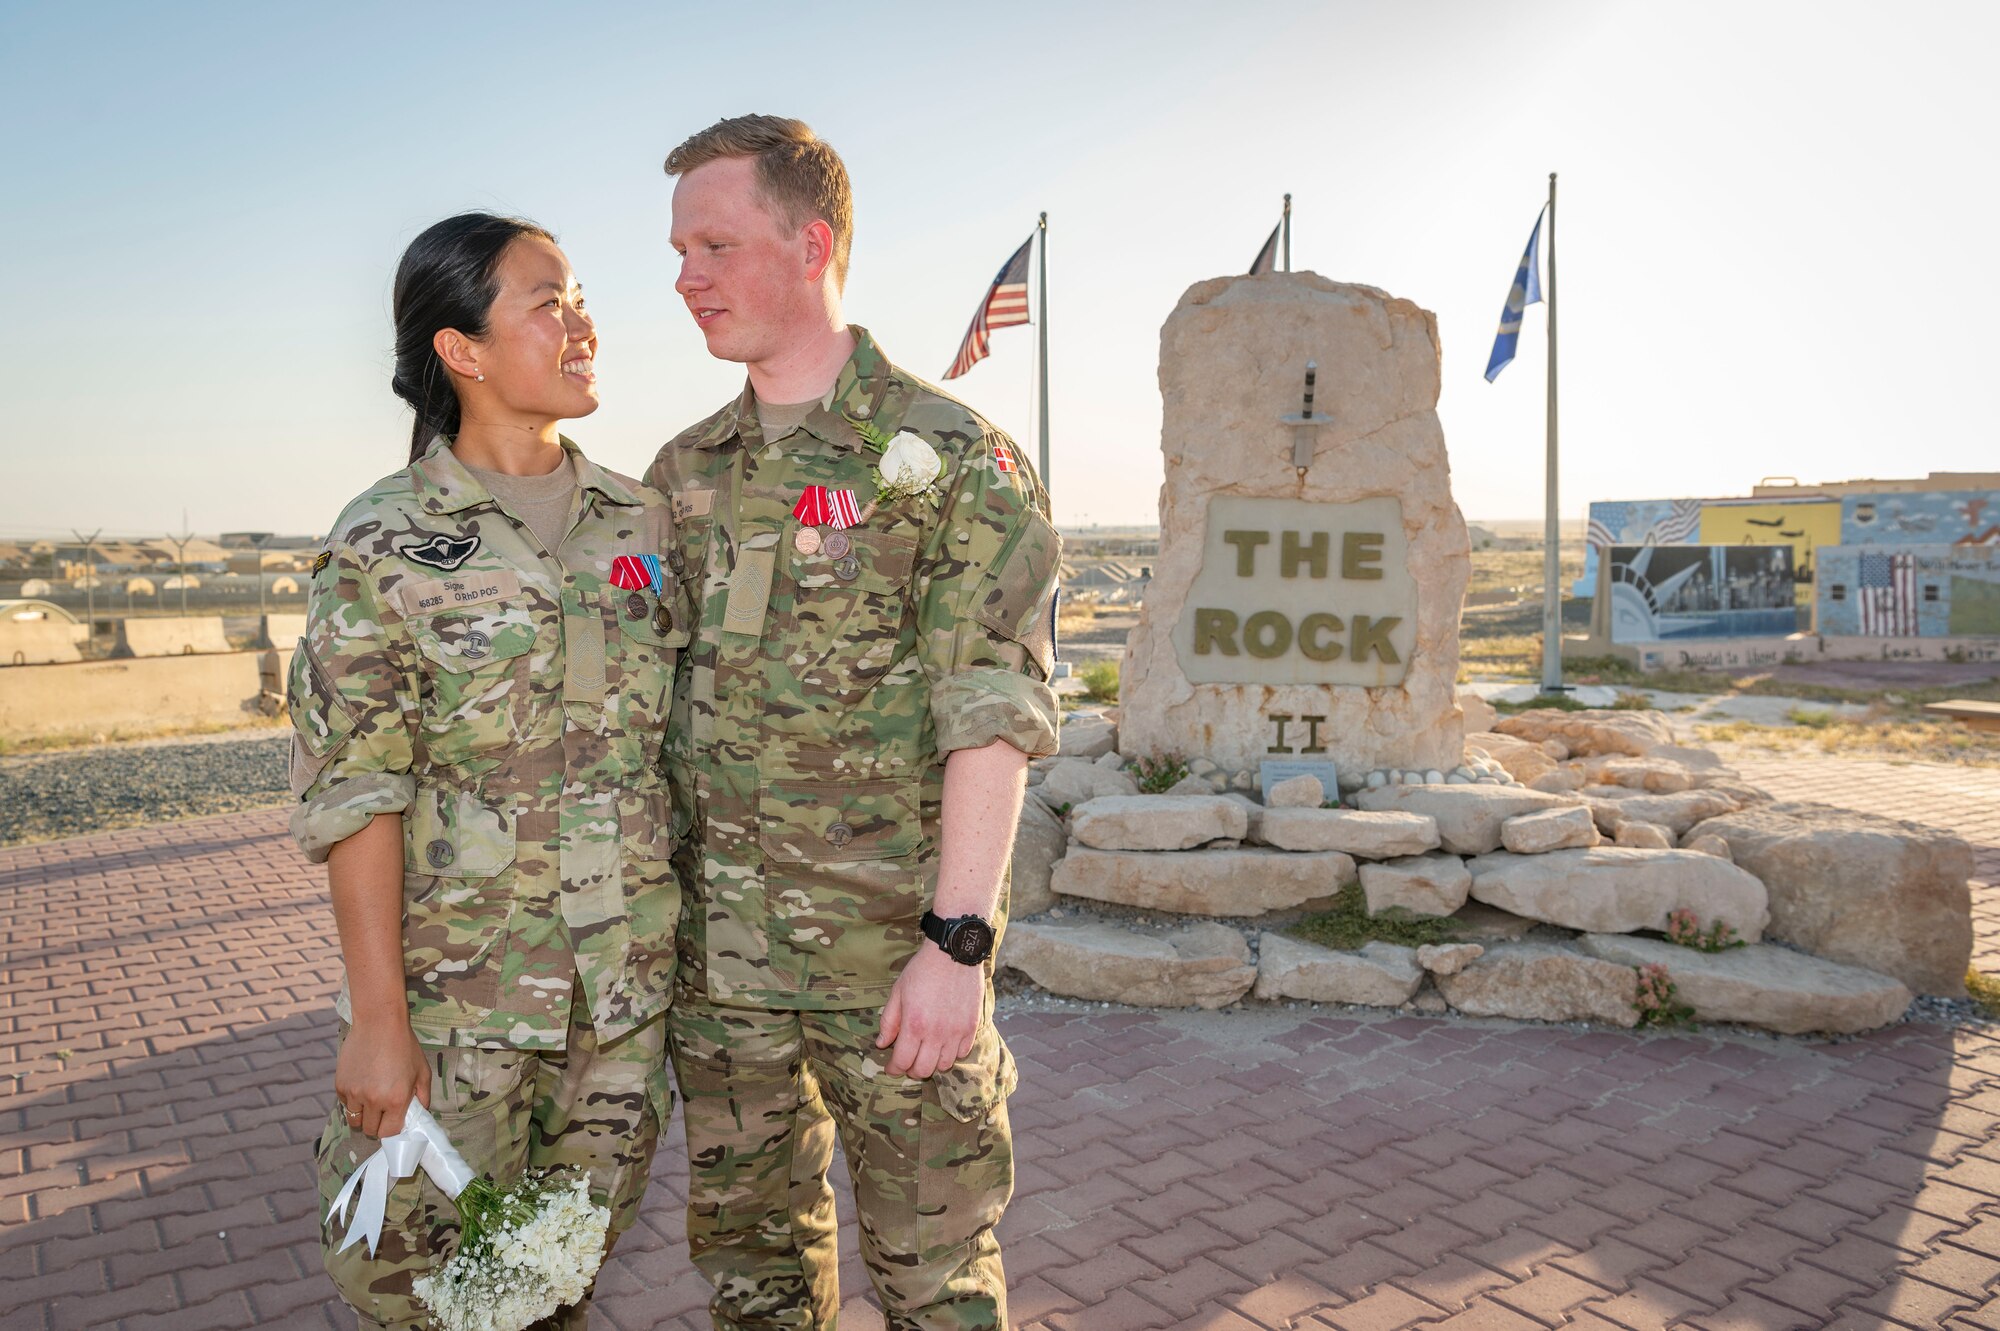 Sergeant 1st Class Signe Li Jakobsen, left, and Sergeant 1st Class Mads Petersen, right, Danish National Support Element quartermasters, pose for a photo after their wedding at Ali Al Salem Air Base, Kuwait, May 3, 2023.